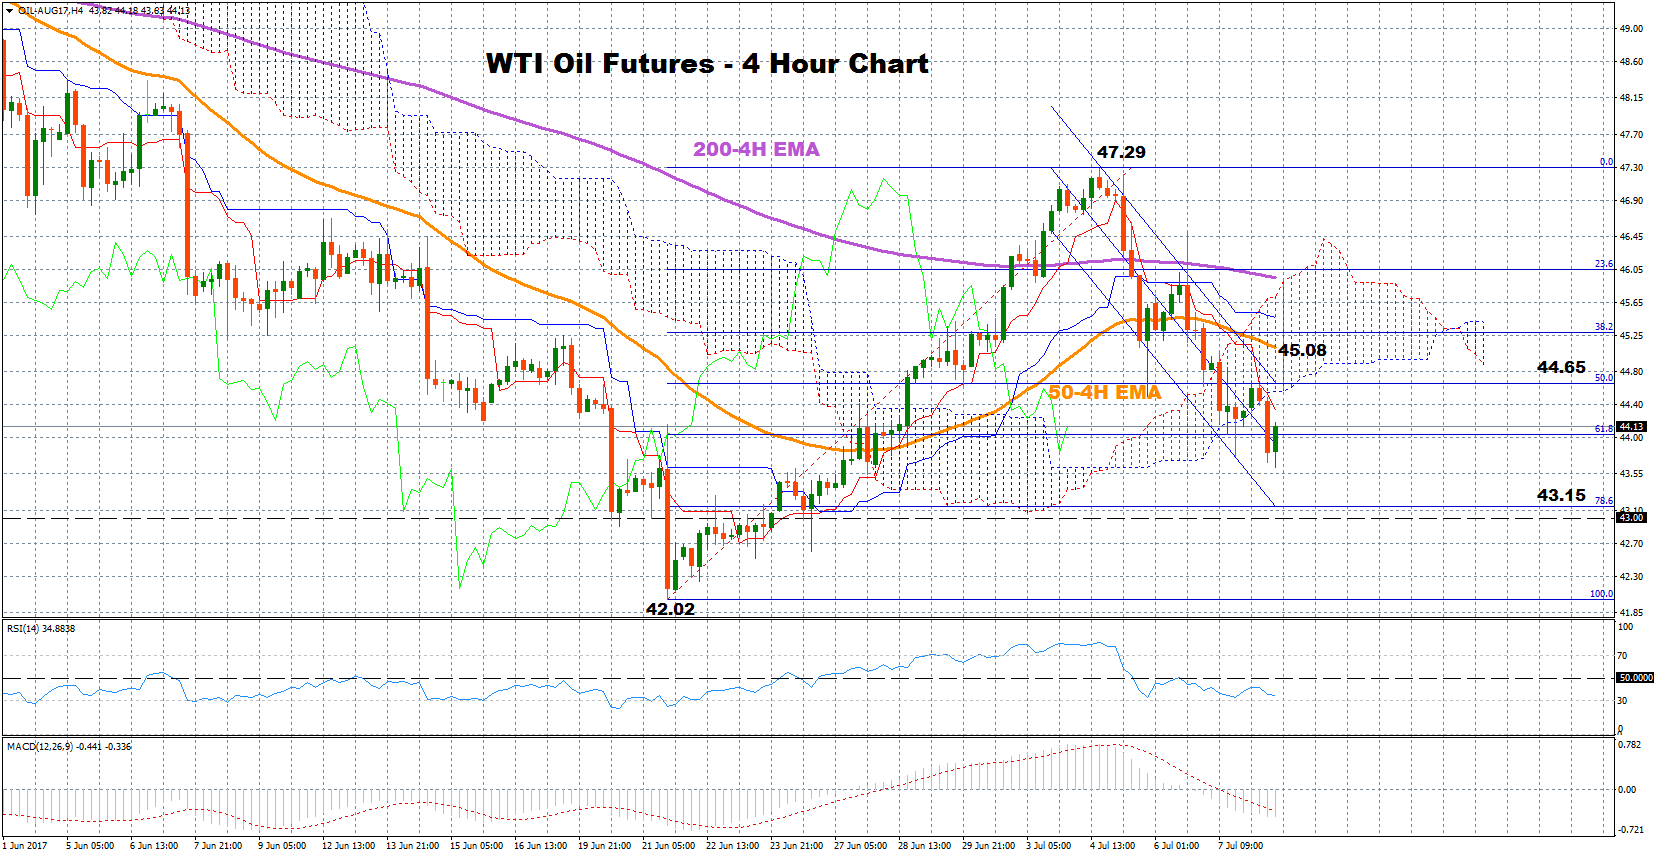 Technical Analysis WTI oil futures bearish in a descending channel